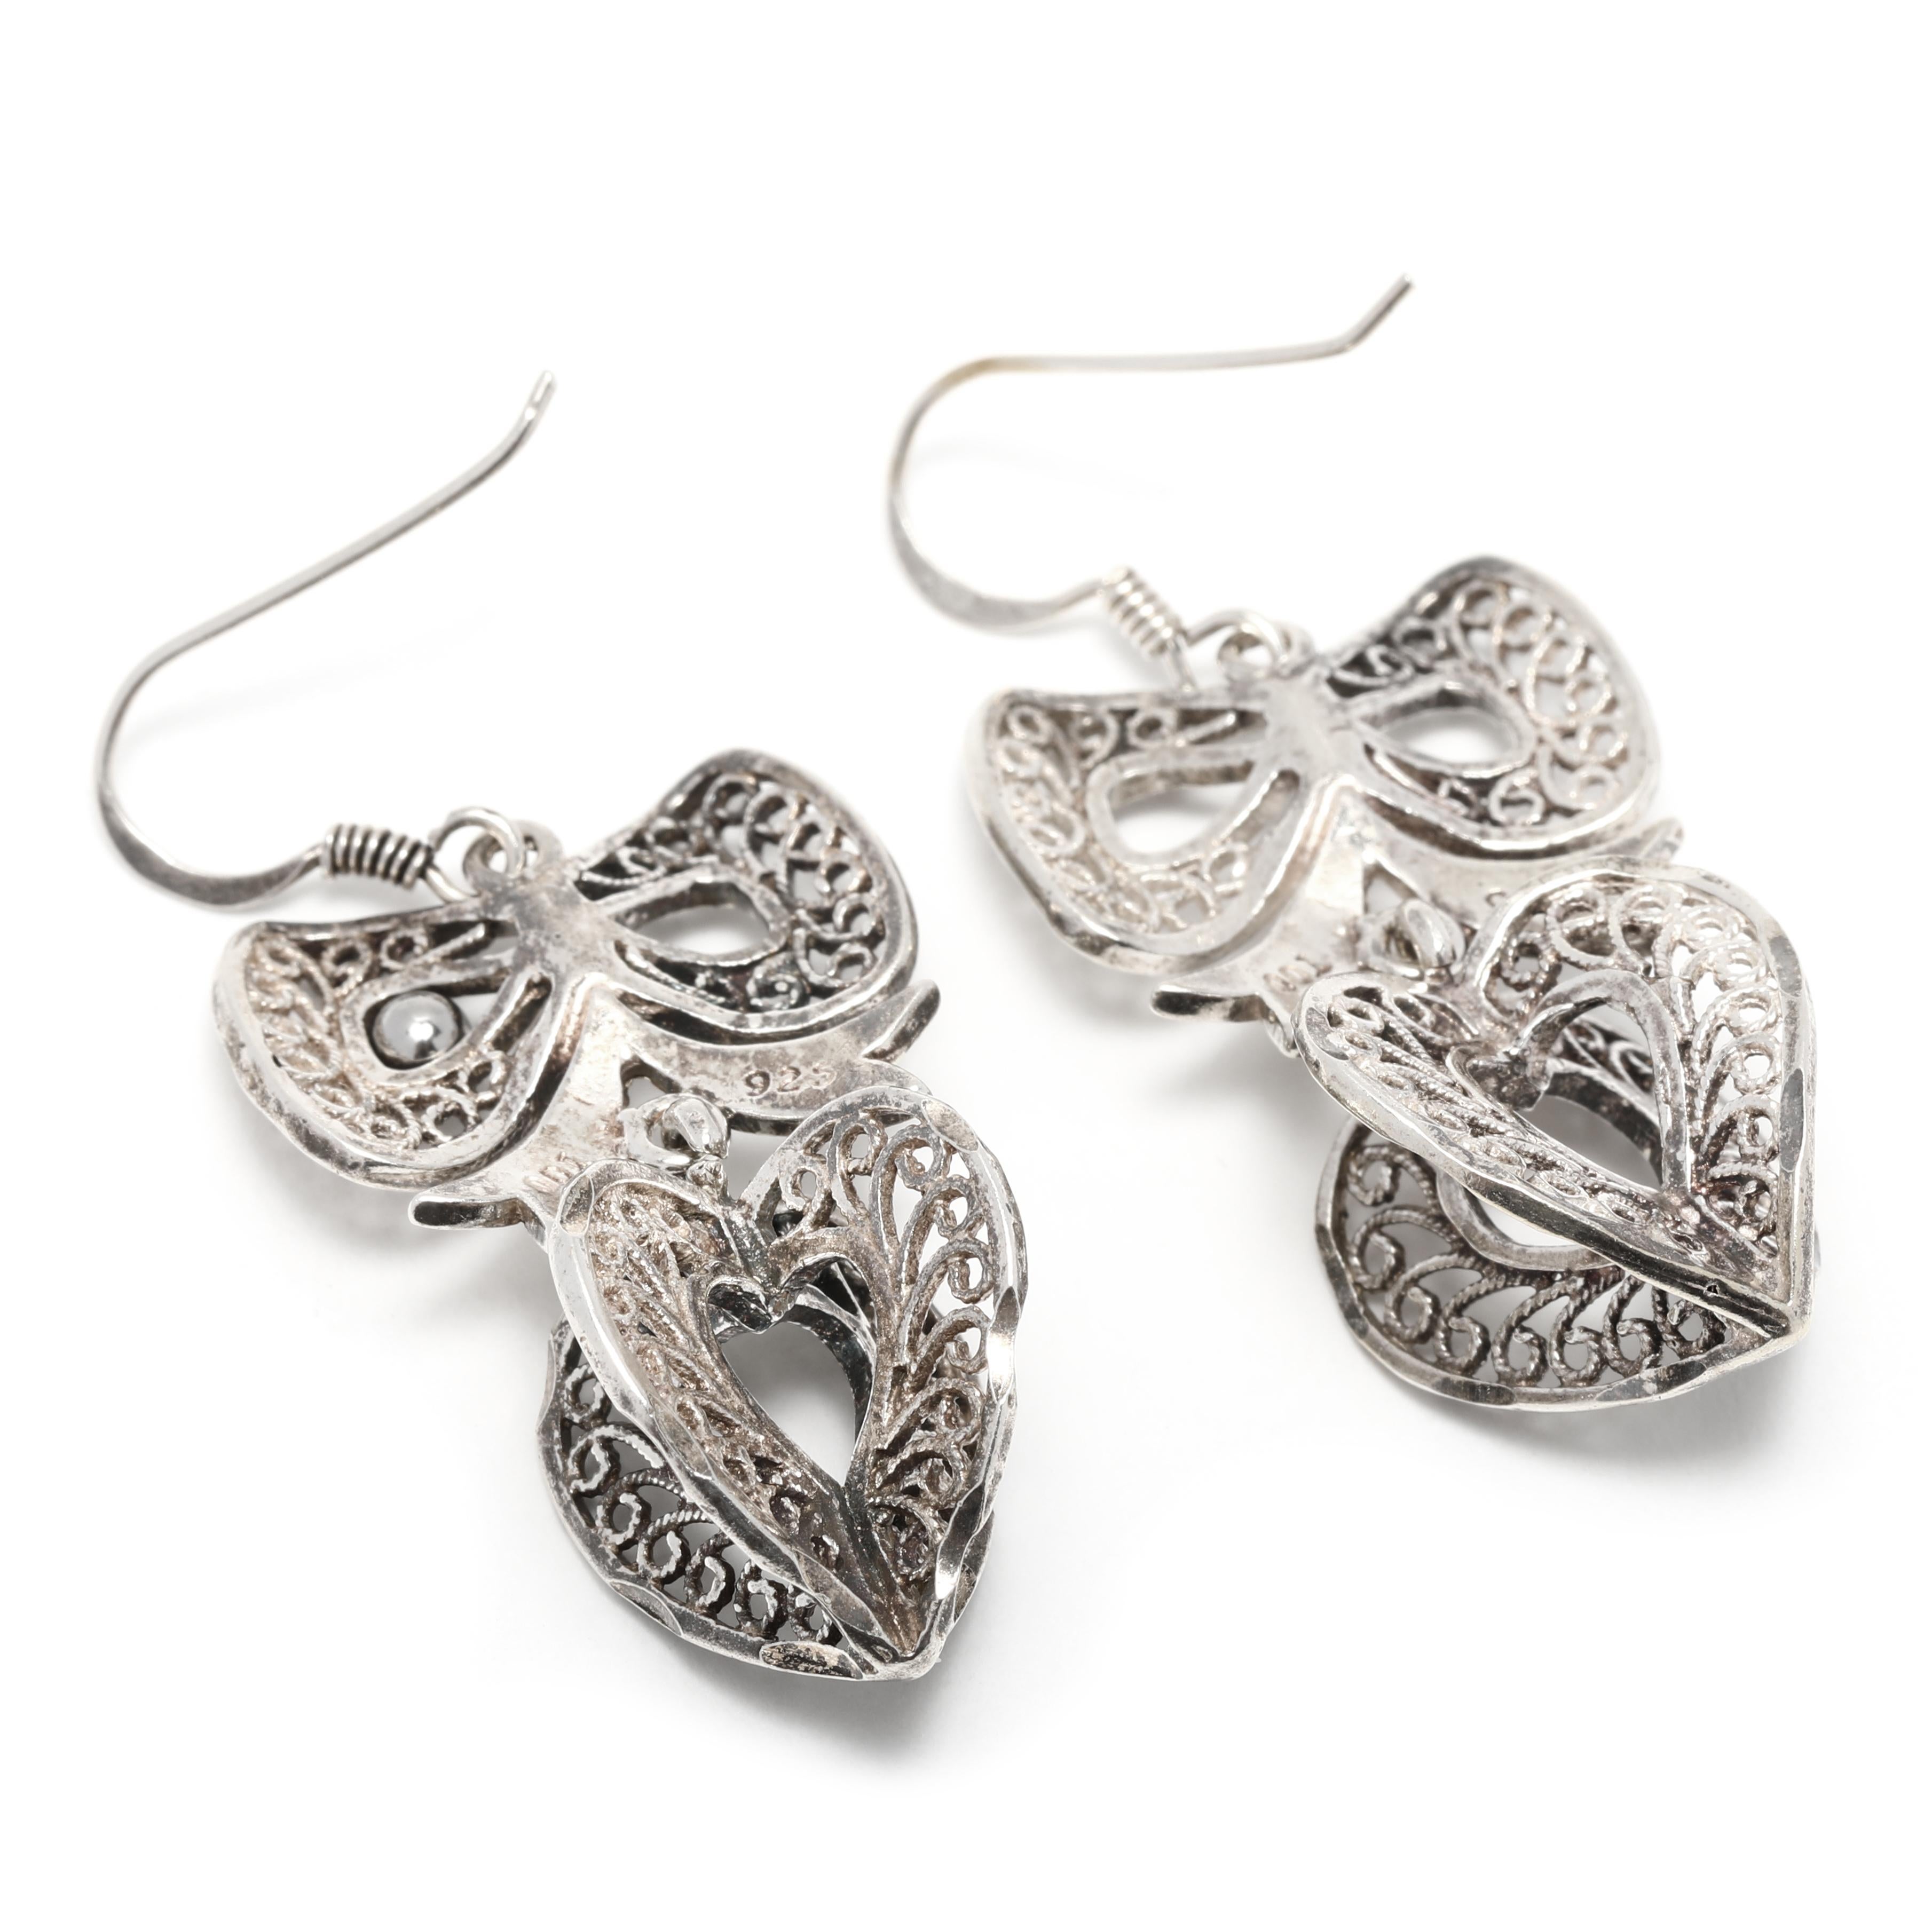 These beautiful vintage sterling silver filigree bow heart dangle earrings are sure to be a stunning addition to any jewelry collection. With a total length of 1 3/4 inches, these large bow dangle earrings have intricate filigree detailing and a